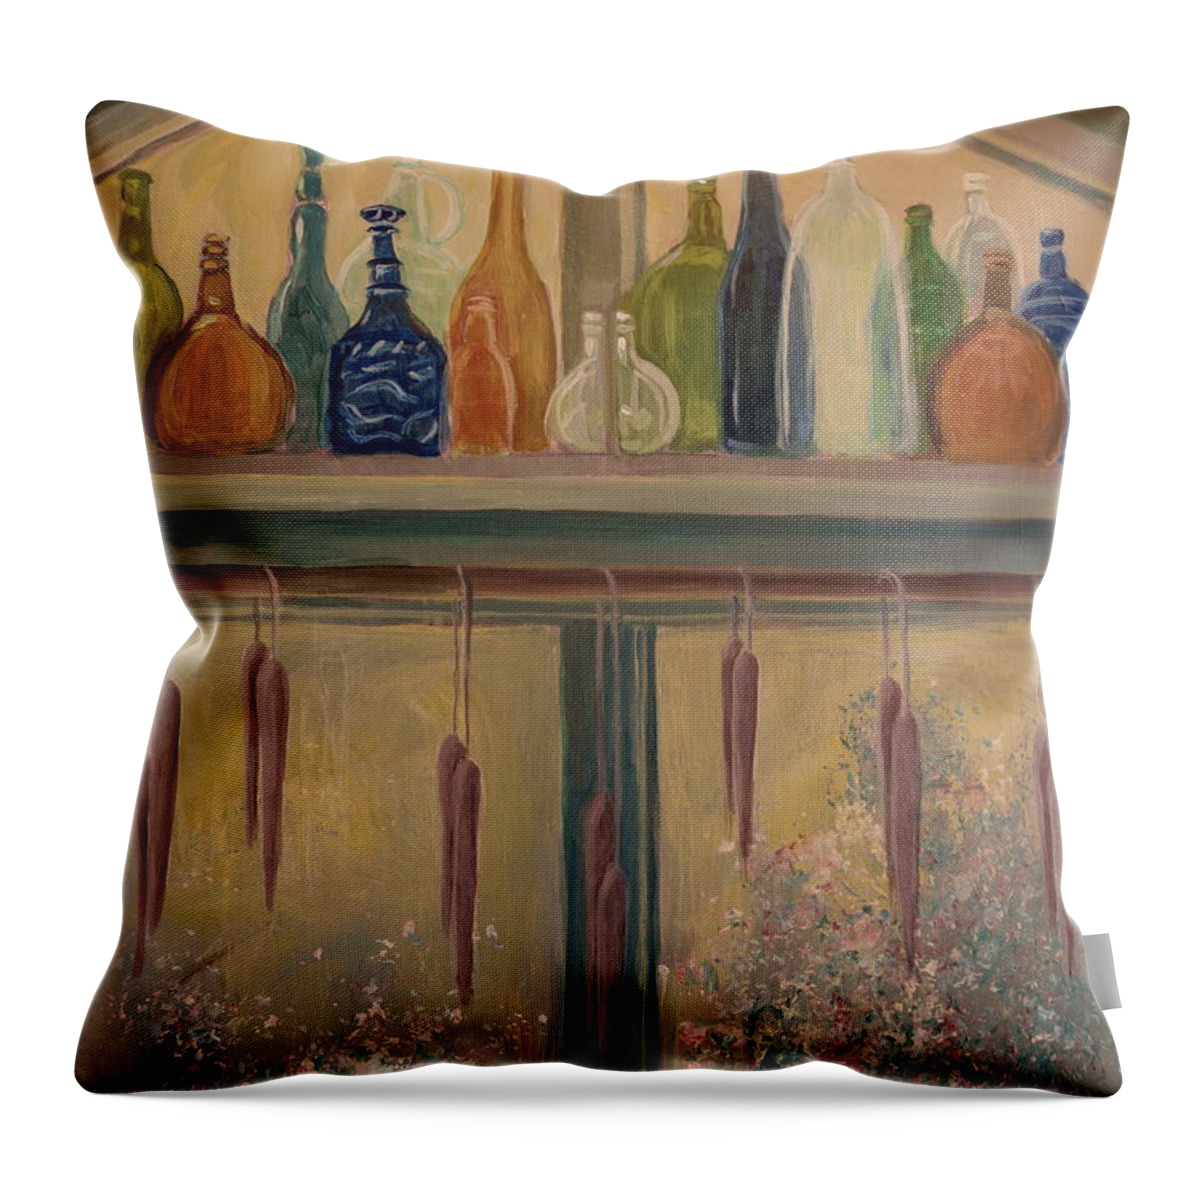 Blues Throw Pillow featuring the painting Bottles and Candle Window by Gretchen Allen